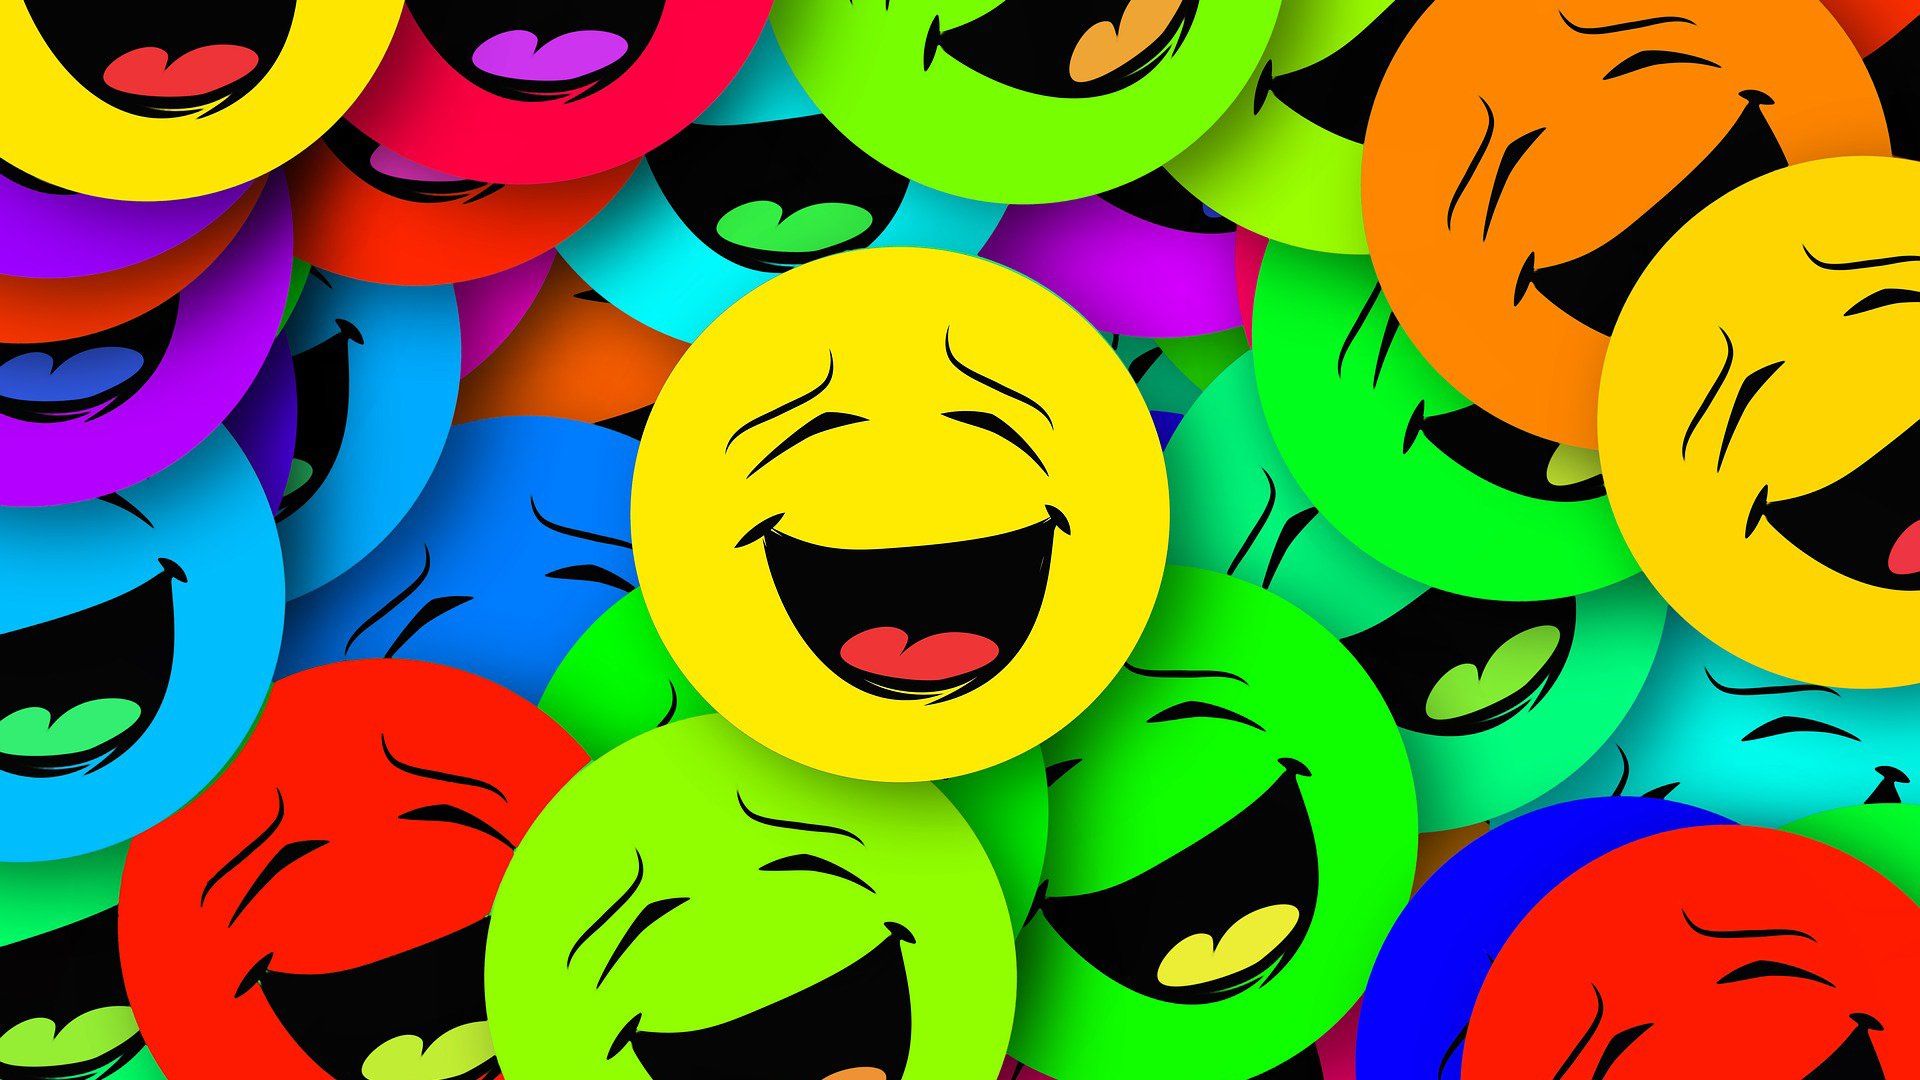 The Best Jokes Apps for iOS. Funny ads, Laughing emoji, Emotions